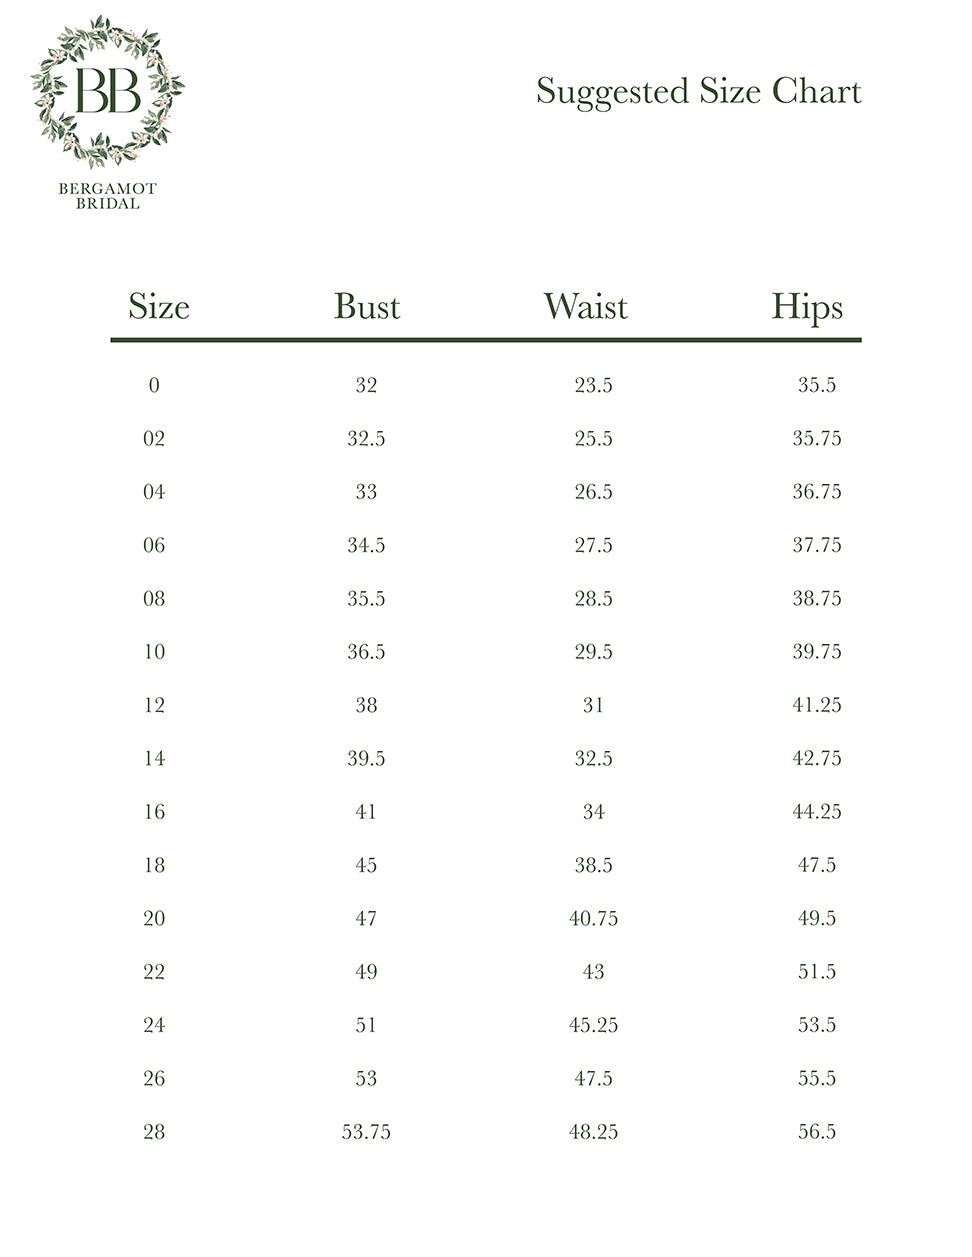 A chart showing the sizes of the Off-the-Shoulder Romantic Wedding Ball Gown with Glamorous Floral Motifs at Bergamot Bridal shops in London.